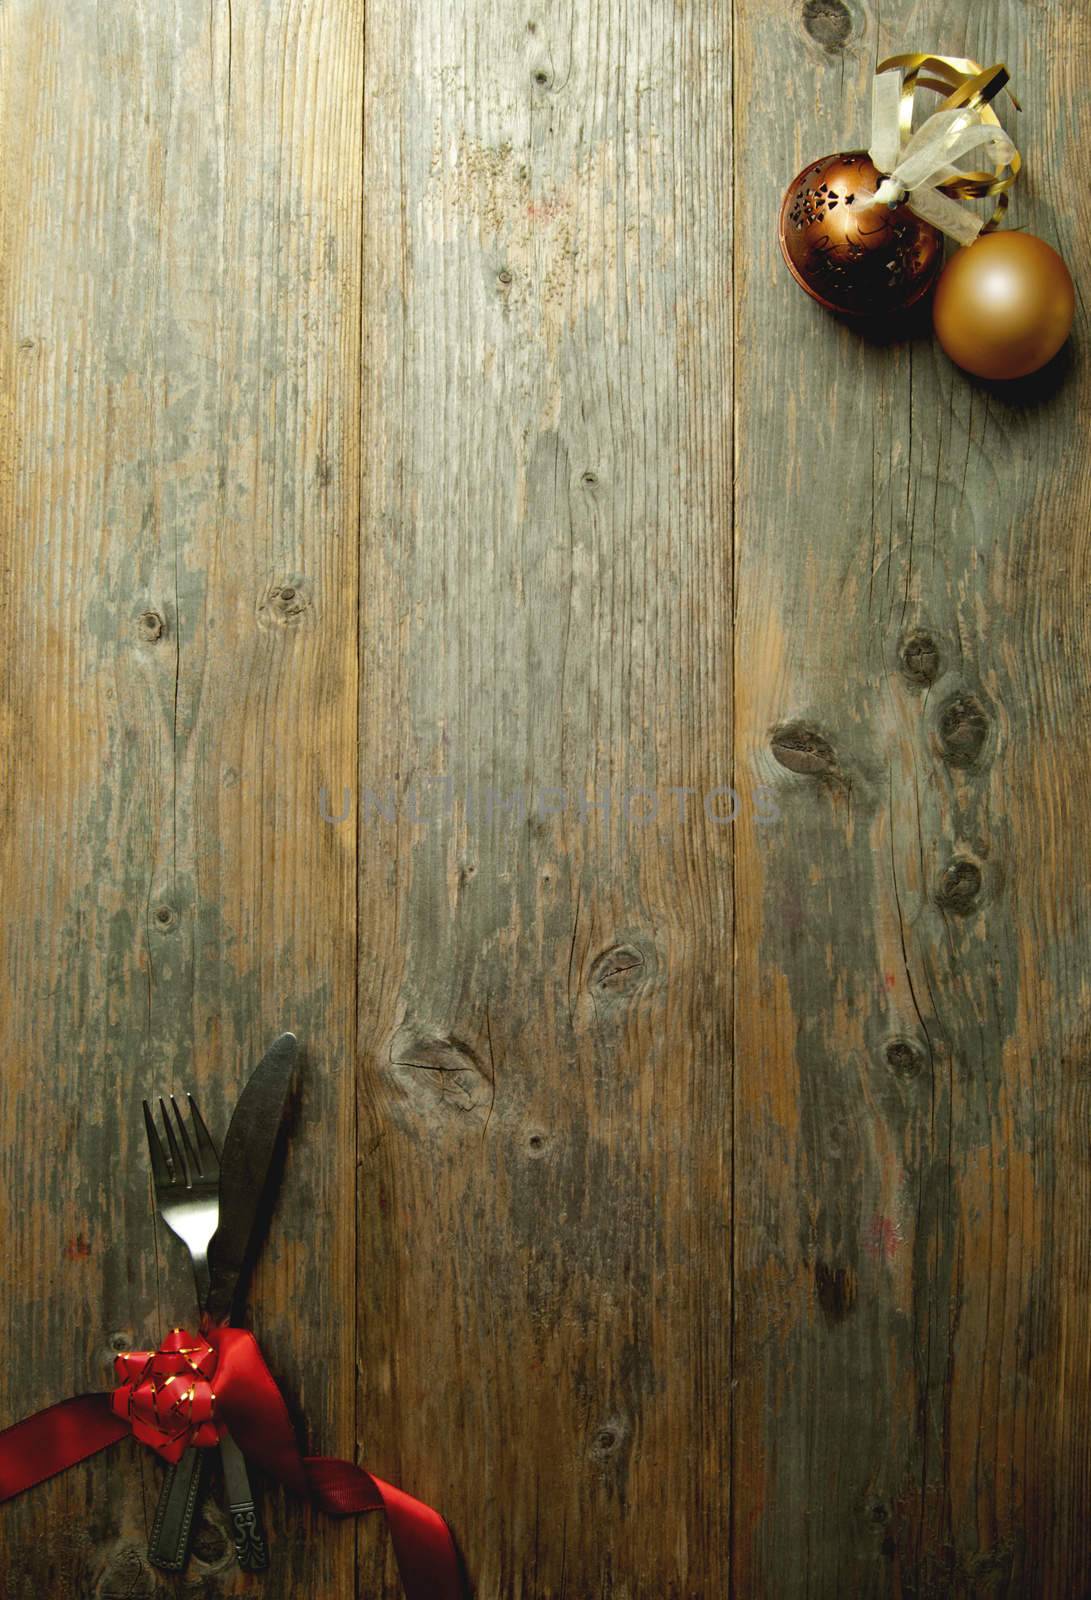 Wooden  background menu with cutlery tied in red ribbon and xmas baubles 